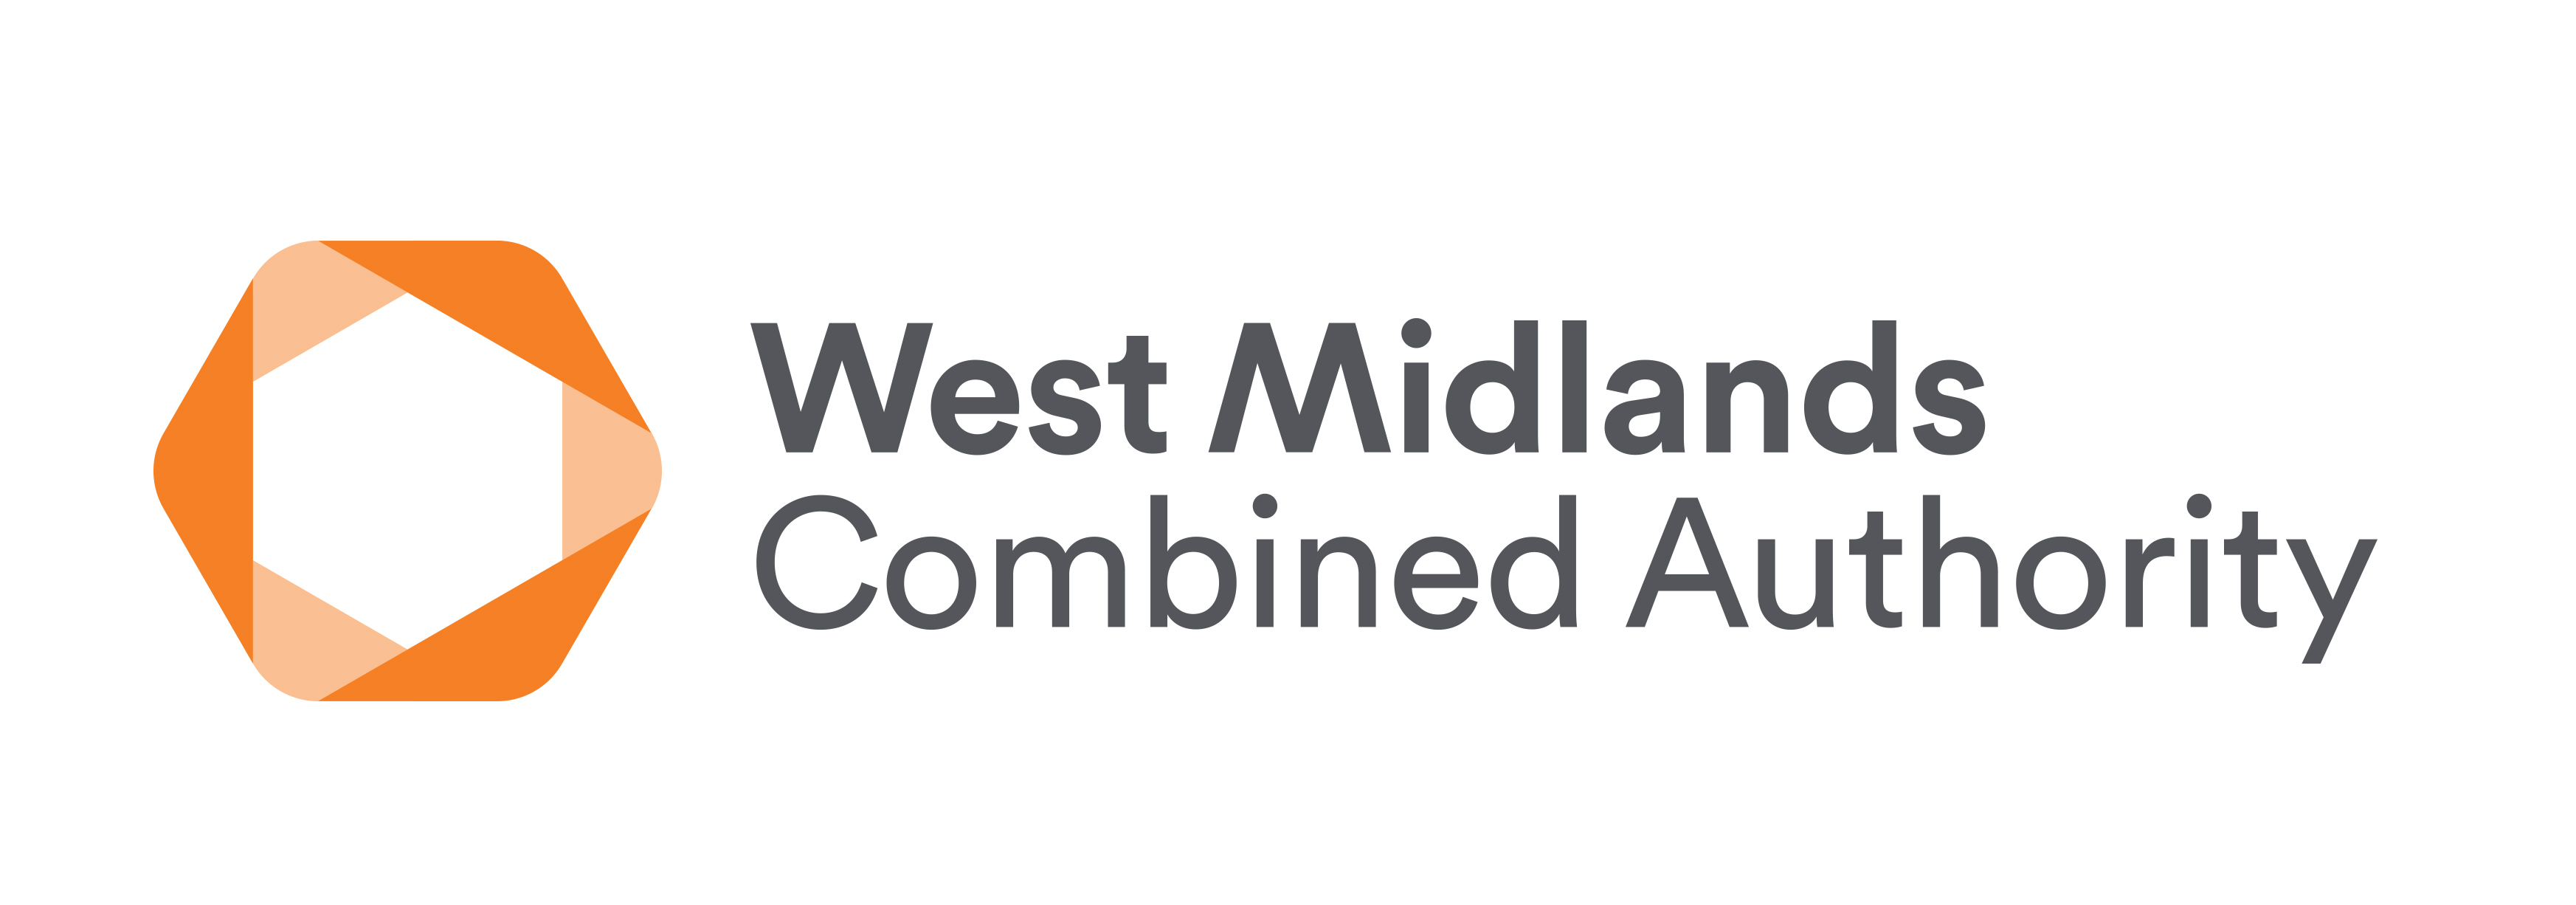 logo for West Midlands Combined Authority